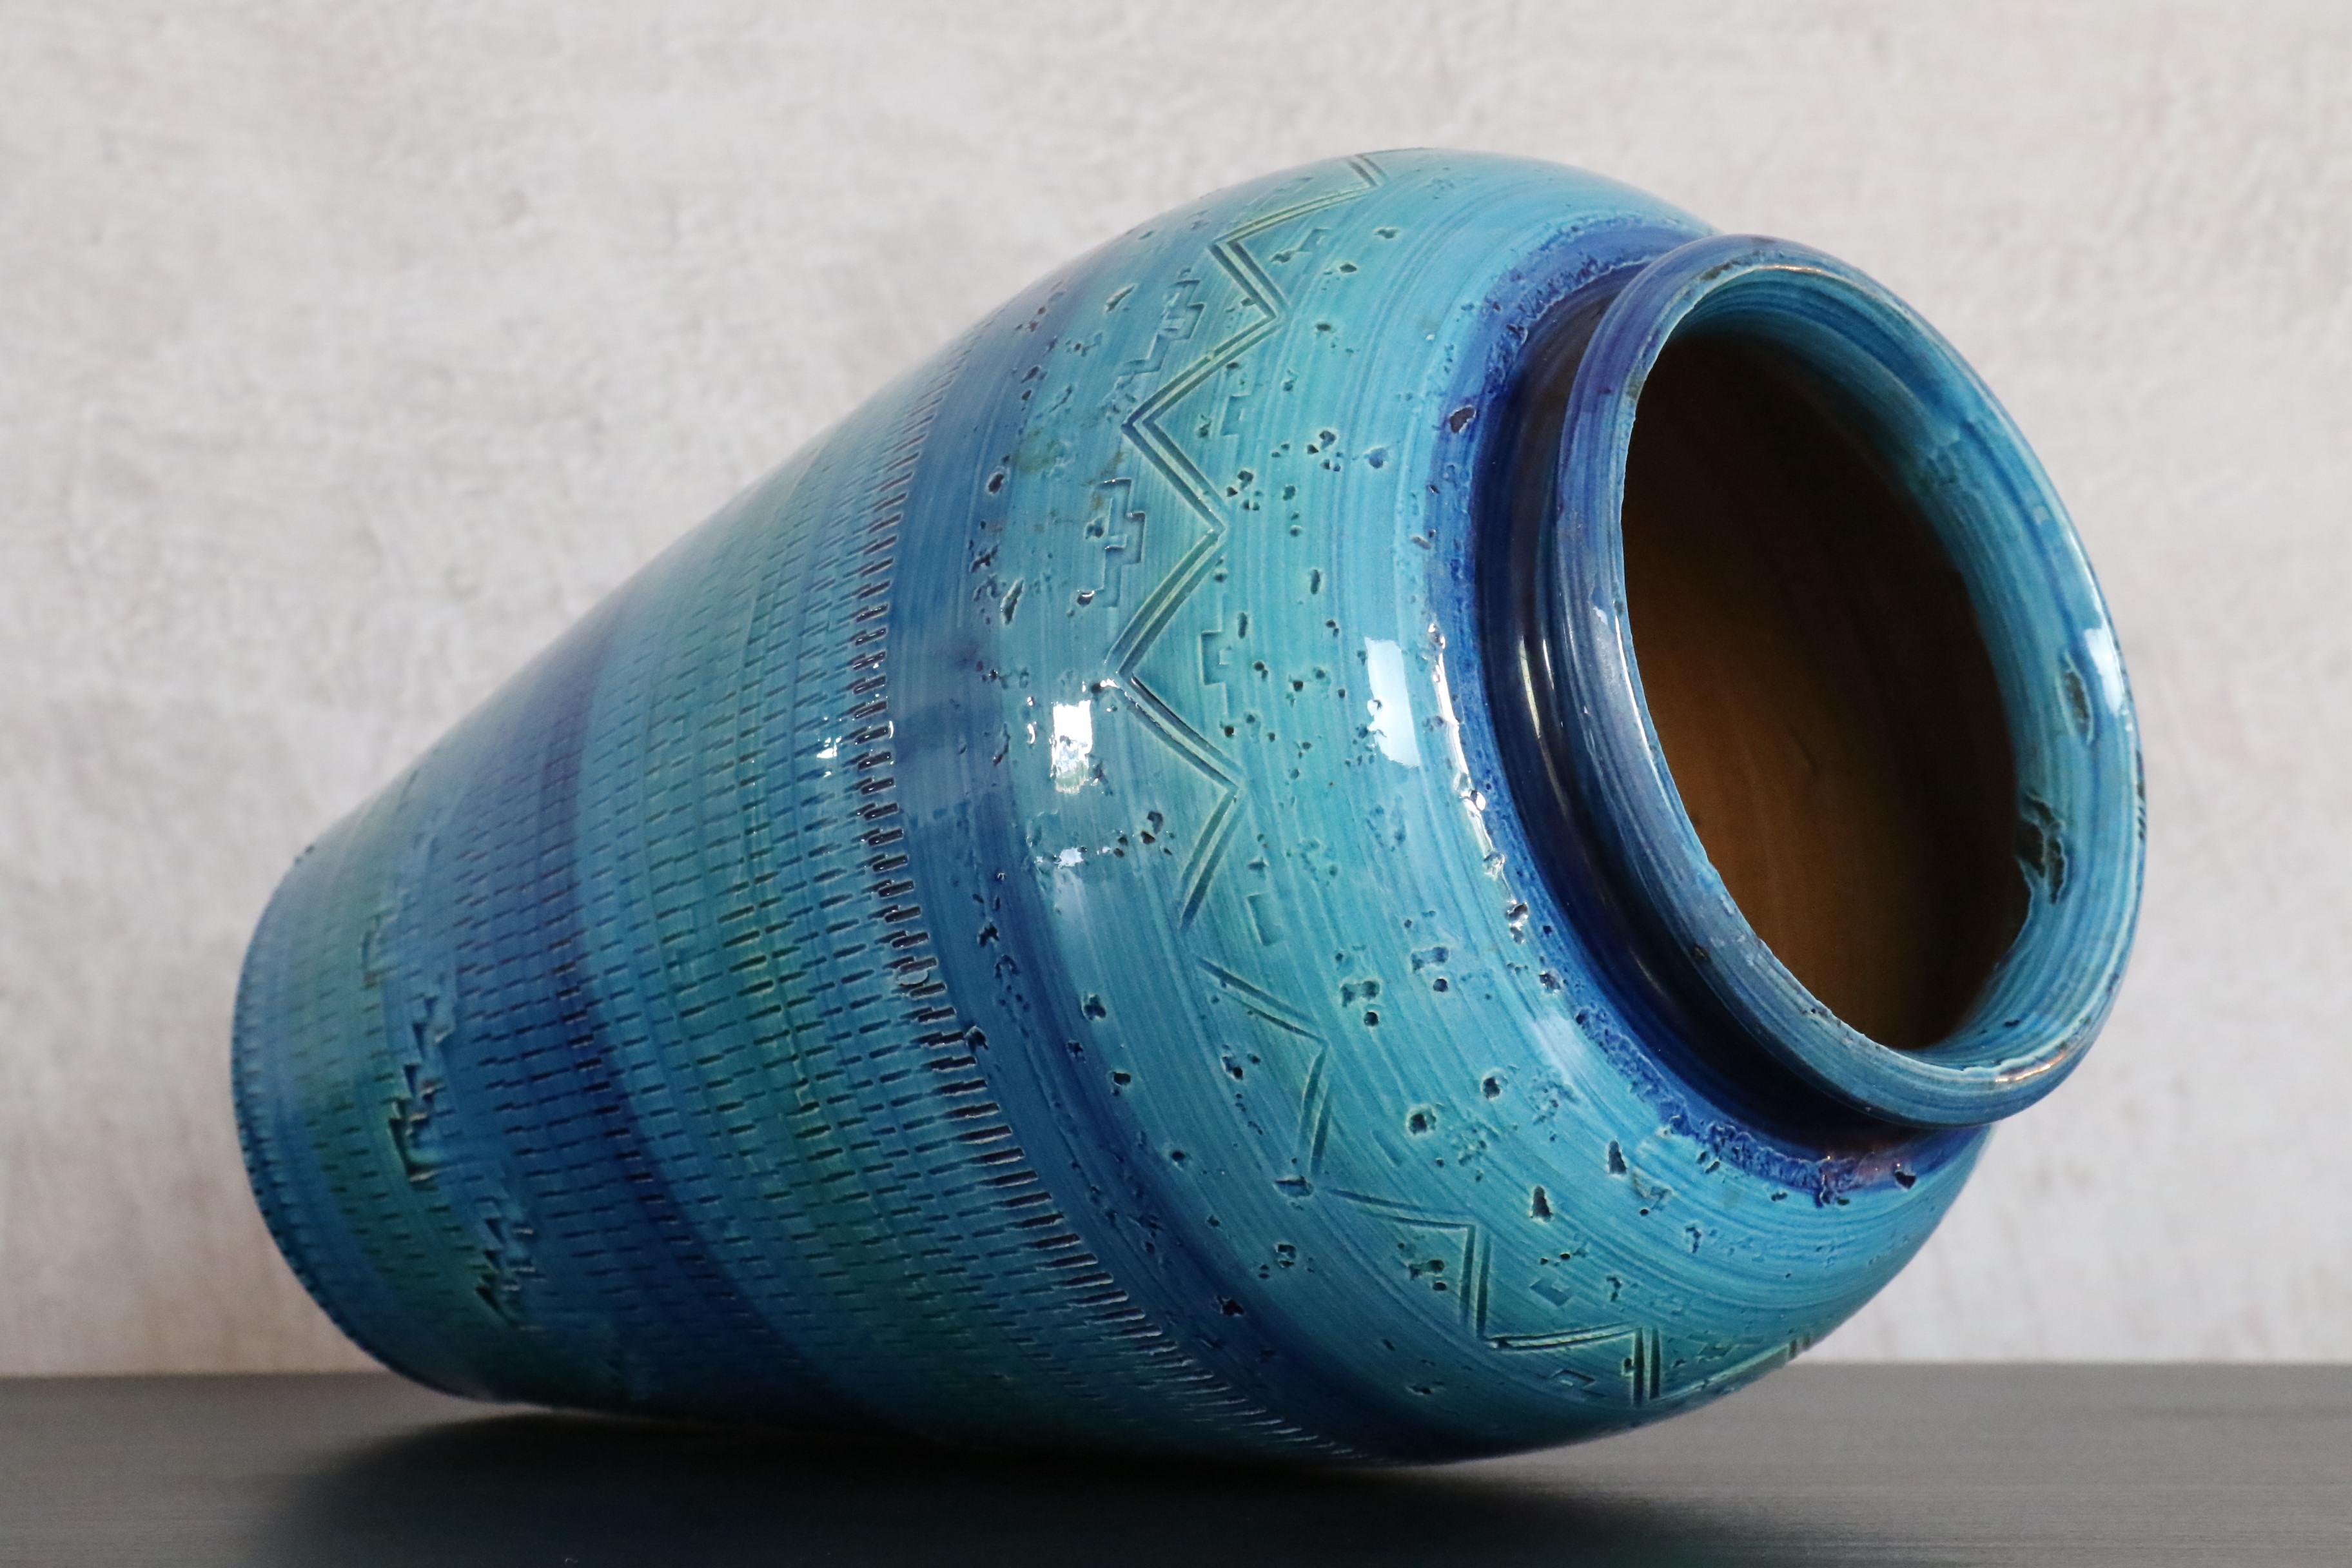 Aldo Londi Terracotta Ceramic Rimini Blue large vase for Bitossi, Italy. 

This large vase was designed by Aldo Londi in Italy during 1960s.
Blue, pale green and turquoise terracotta ceramic are glazed by hand with a geometric design carved. 
This